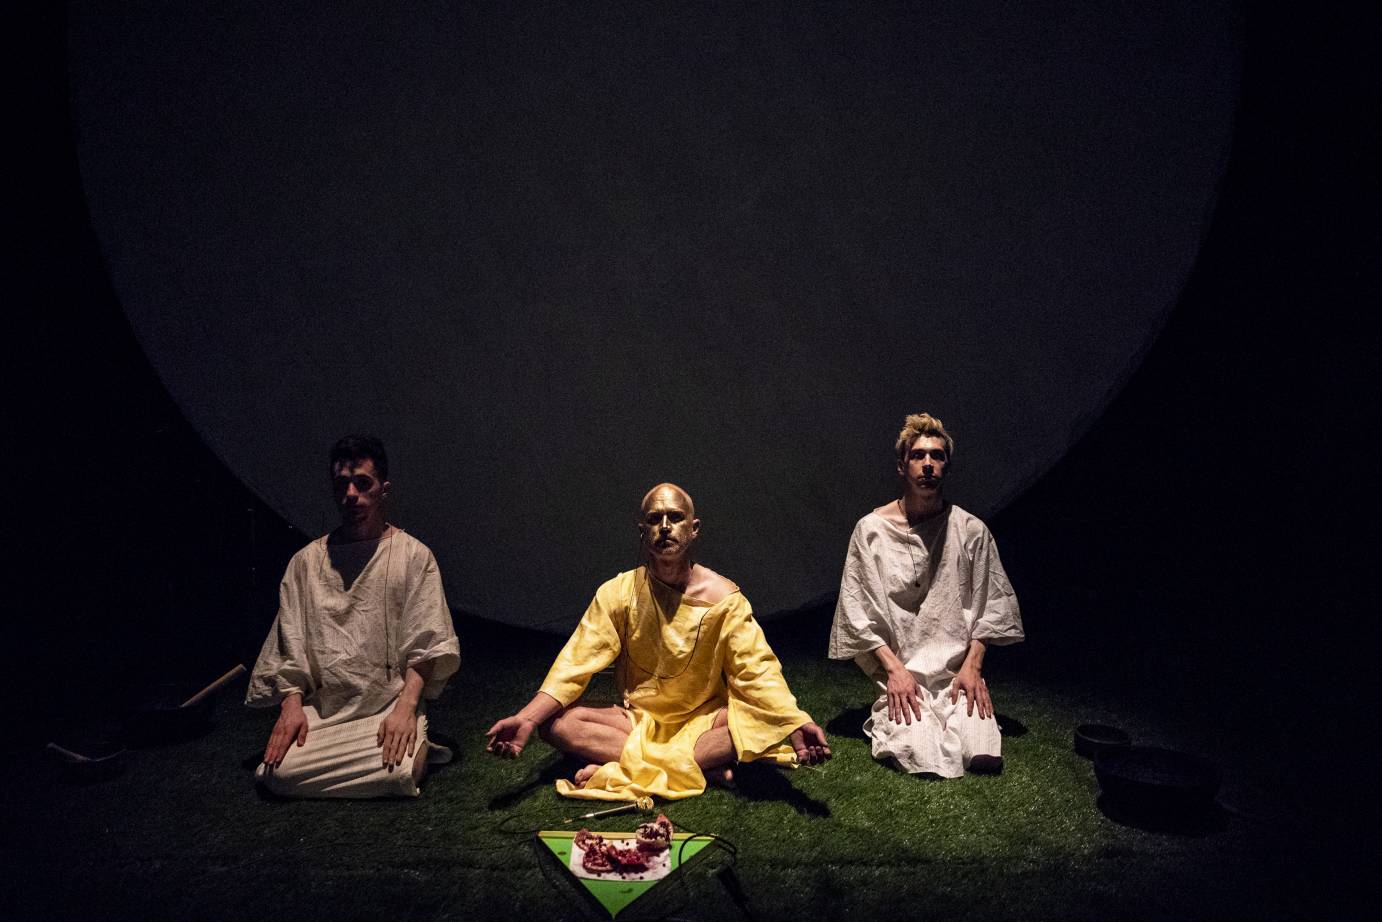 Three individuals sit like yogis behind a microphone and bowl of pomegranates